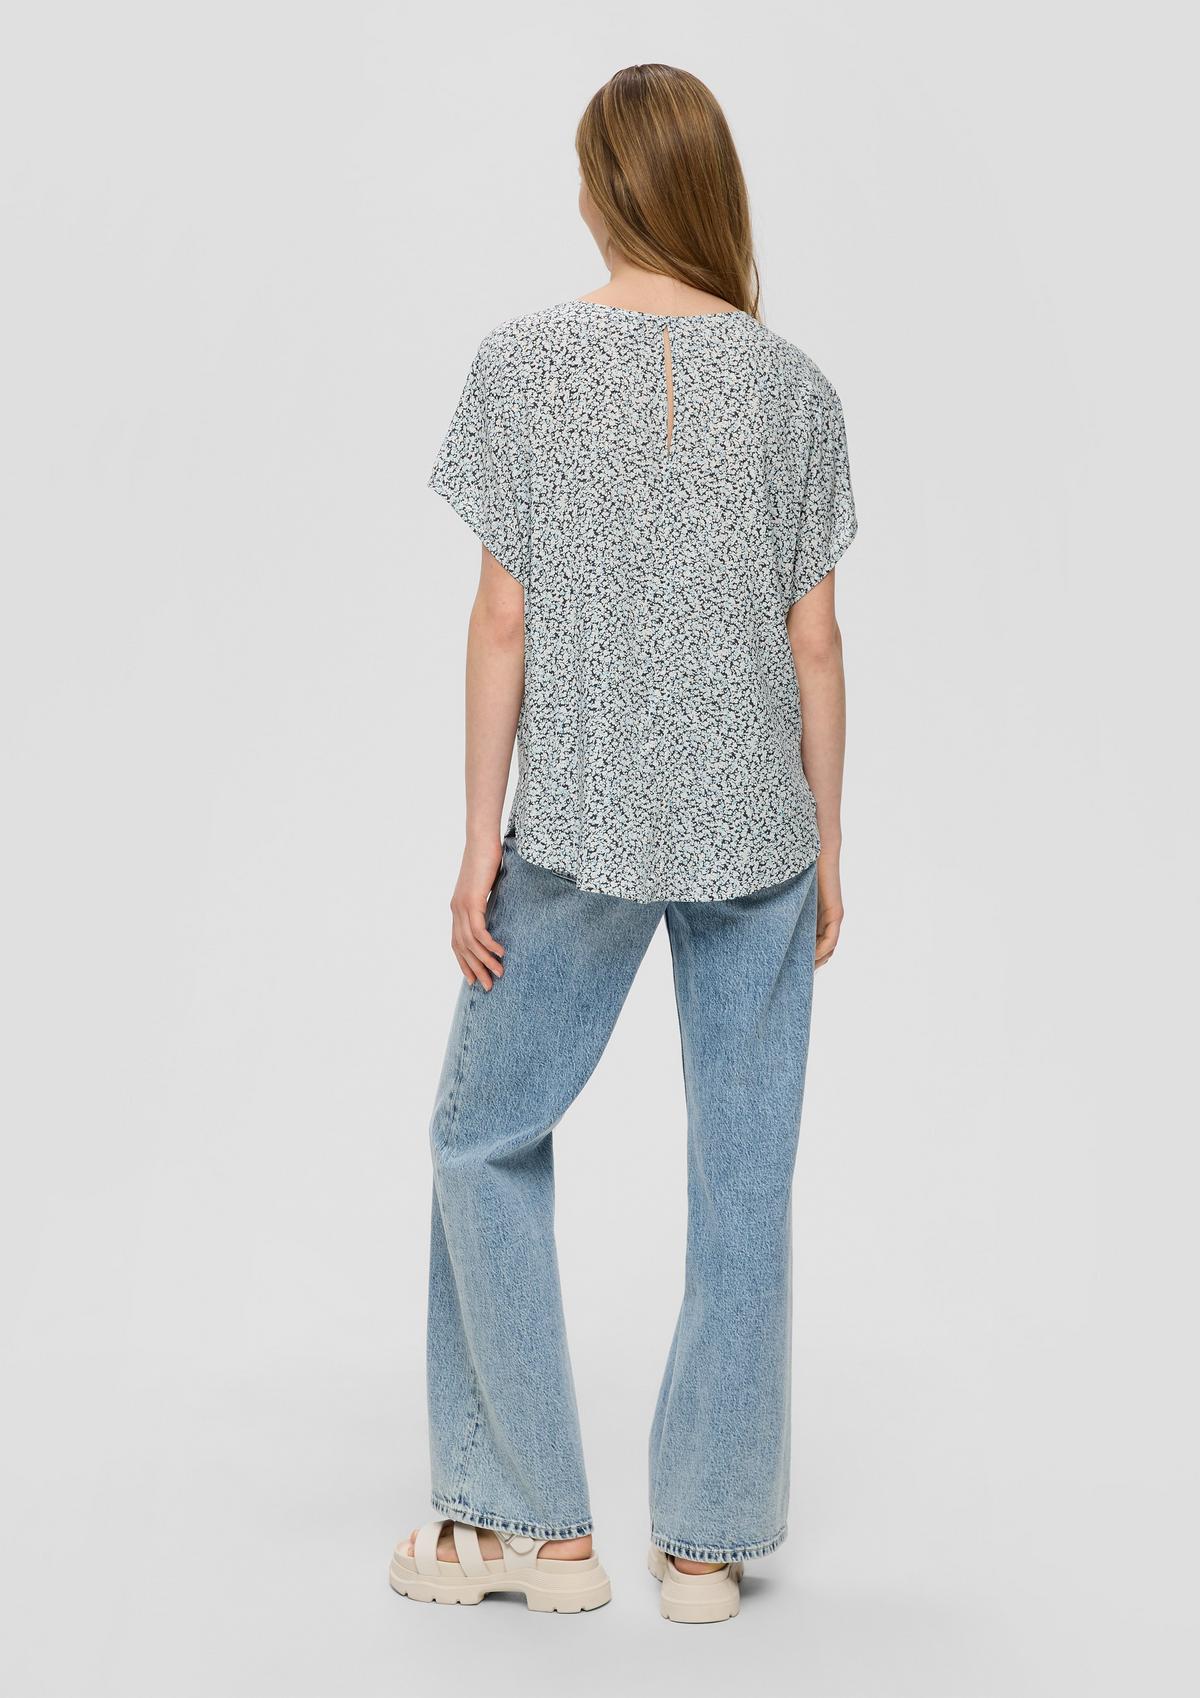 s.Oliver Oversized top with an elongated back